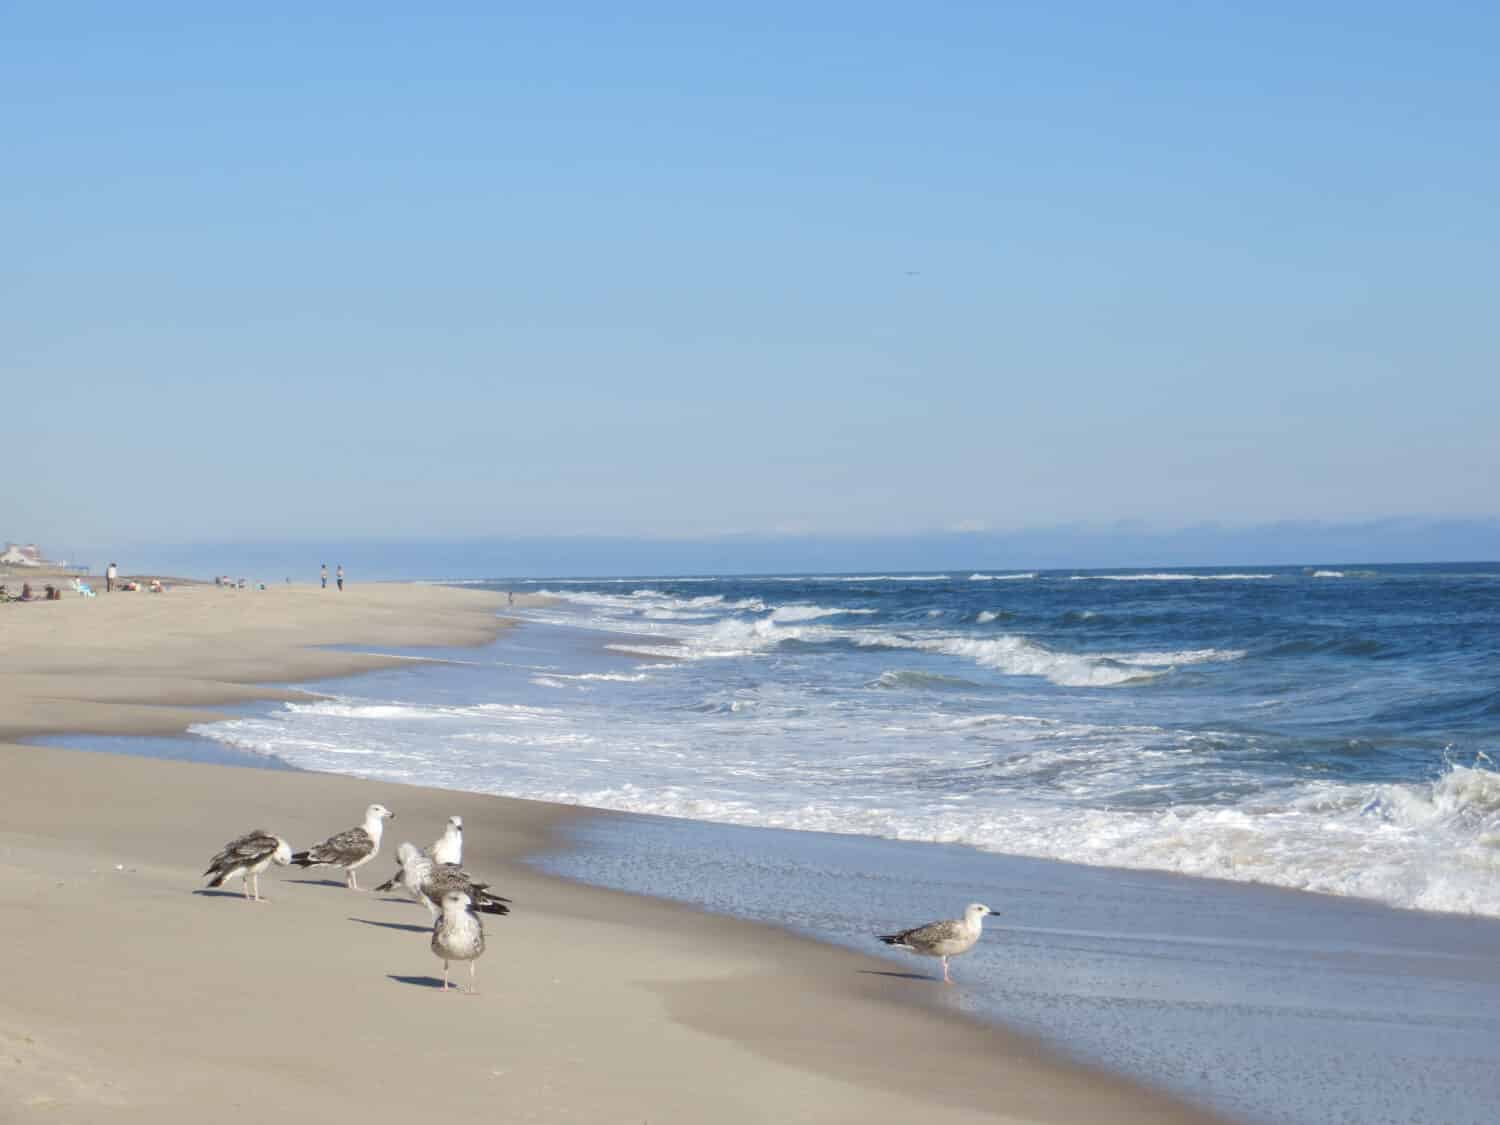 A flock of seagulls on the beach at Cooper's Beach in Southampton, Long Island, New York.